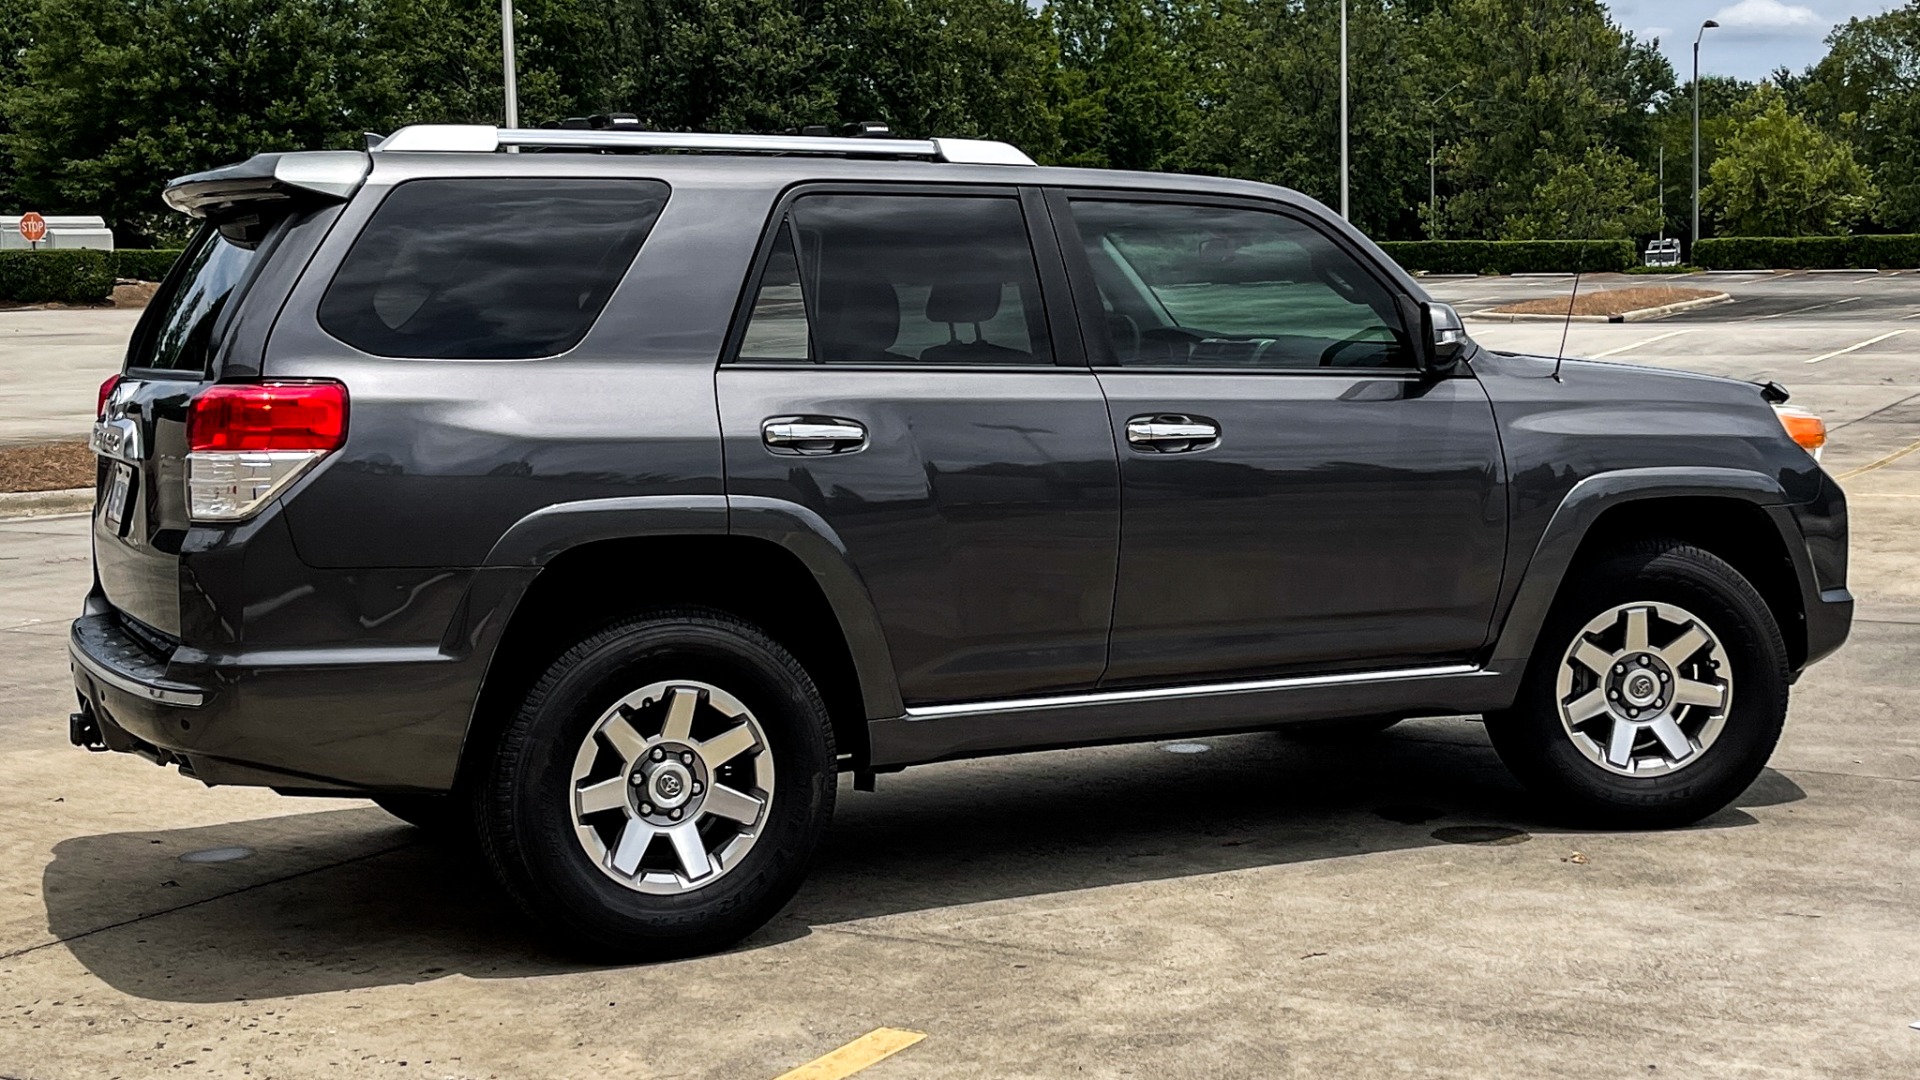 Used 2011 Toyota 4Runner SR5 / SUNROOF / 4X4 / BLUETOOTH / BACKUP CAMERA for sale Sold at Formula Imports in Charlotte NC 28227 3